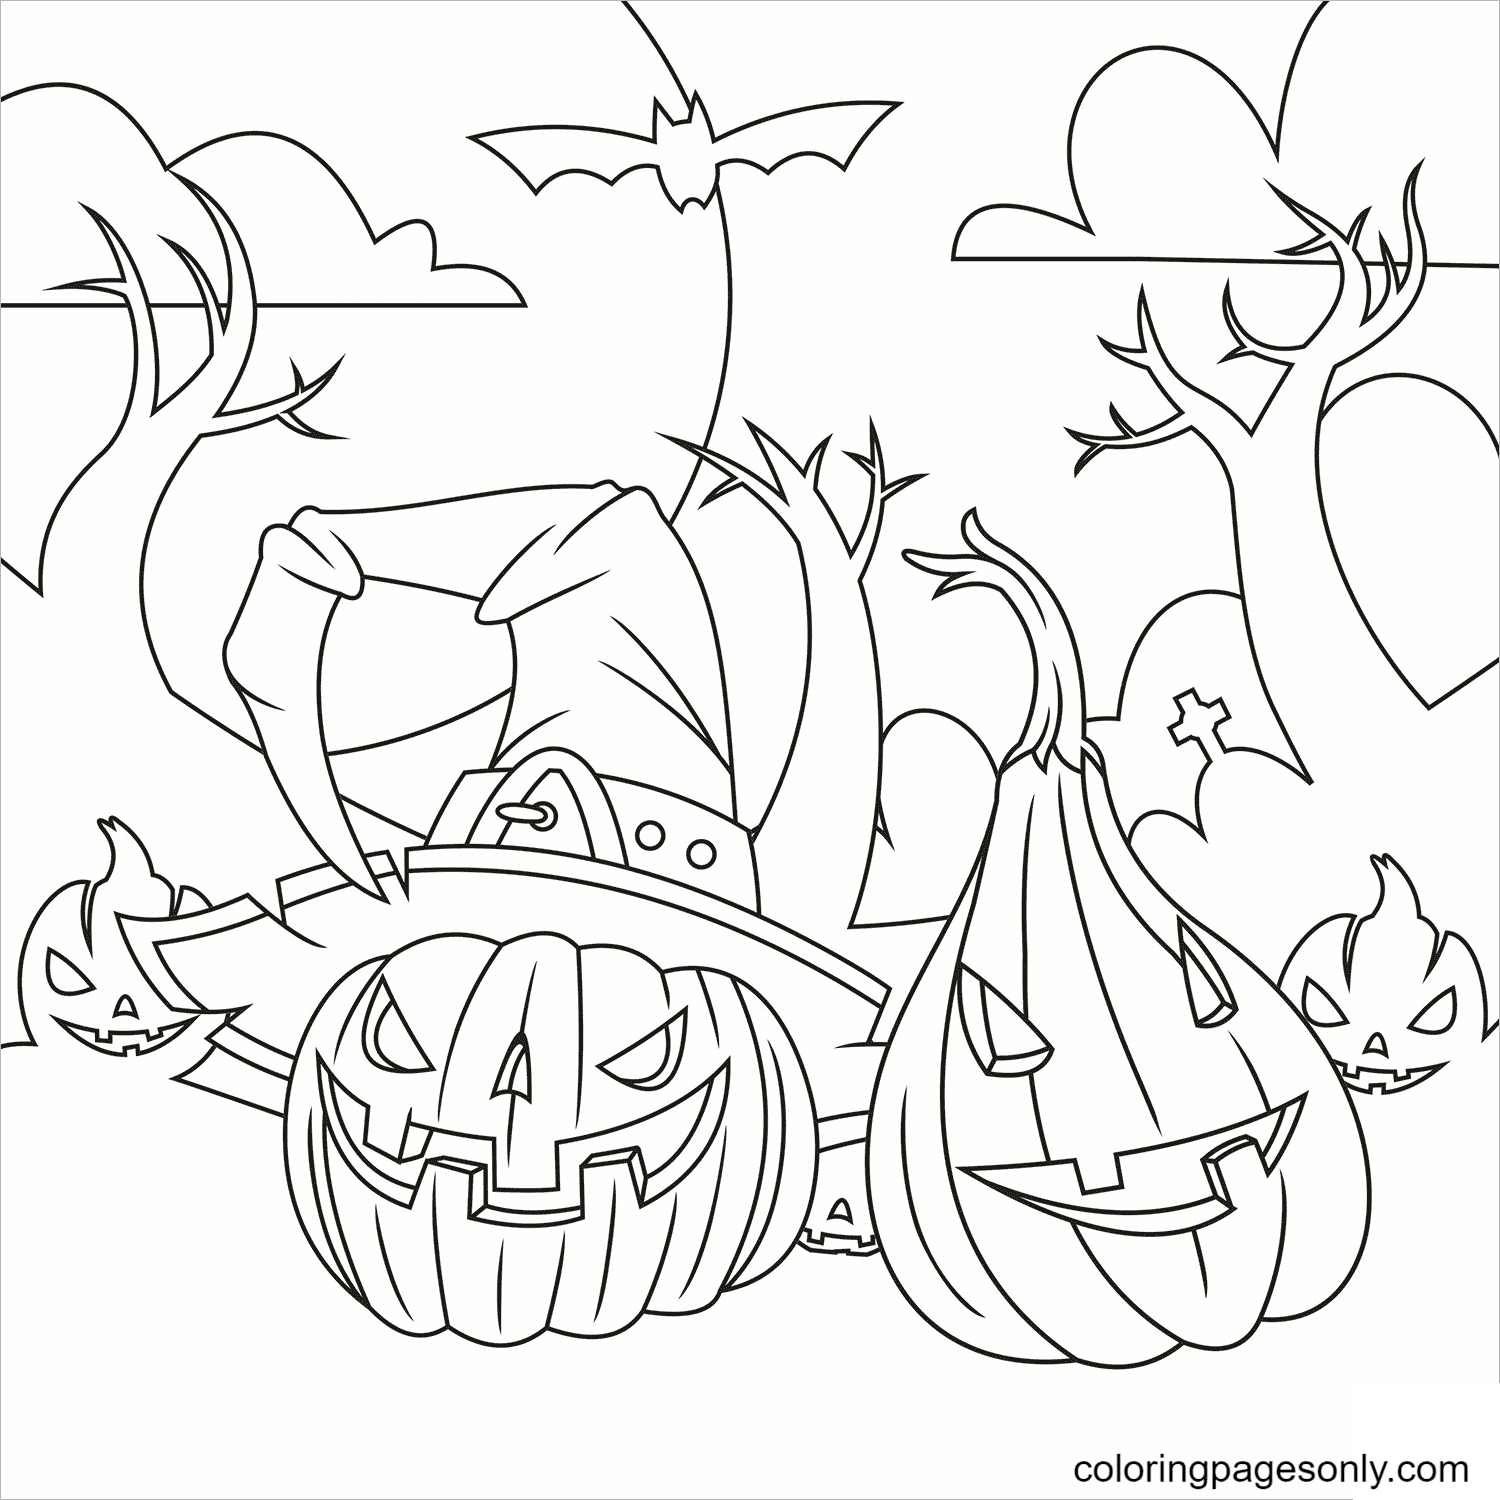 Jack O' Lantern Coloring Pages Printable for Free Download